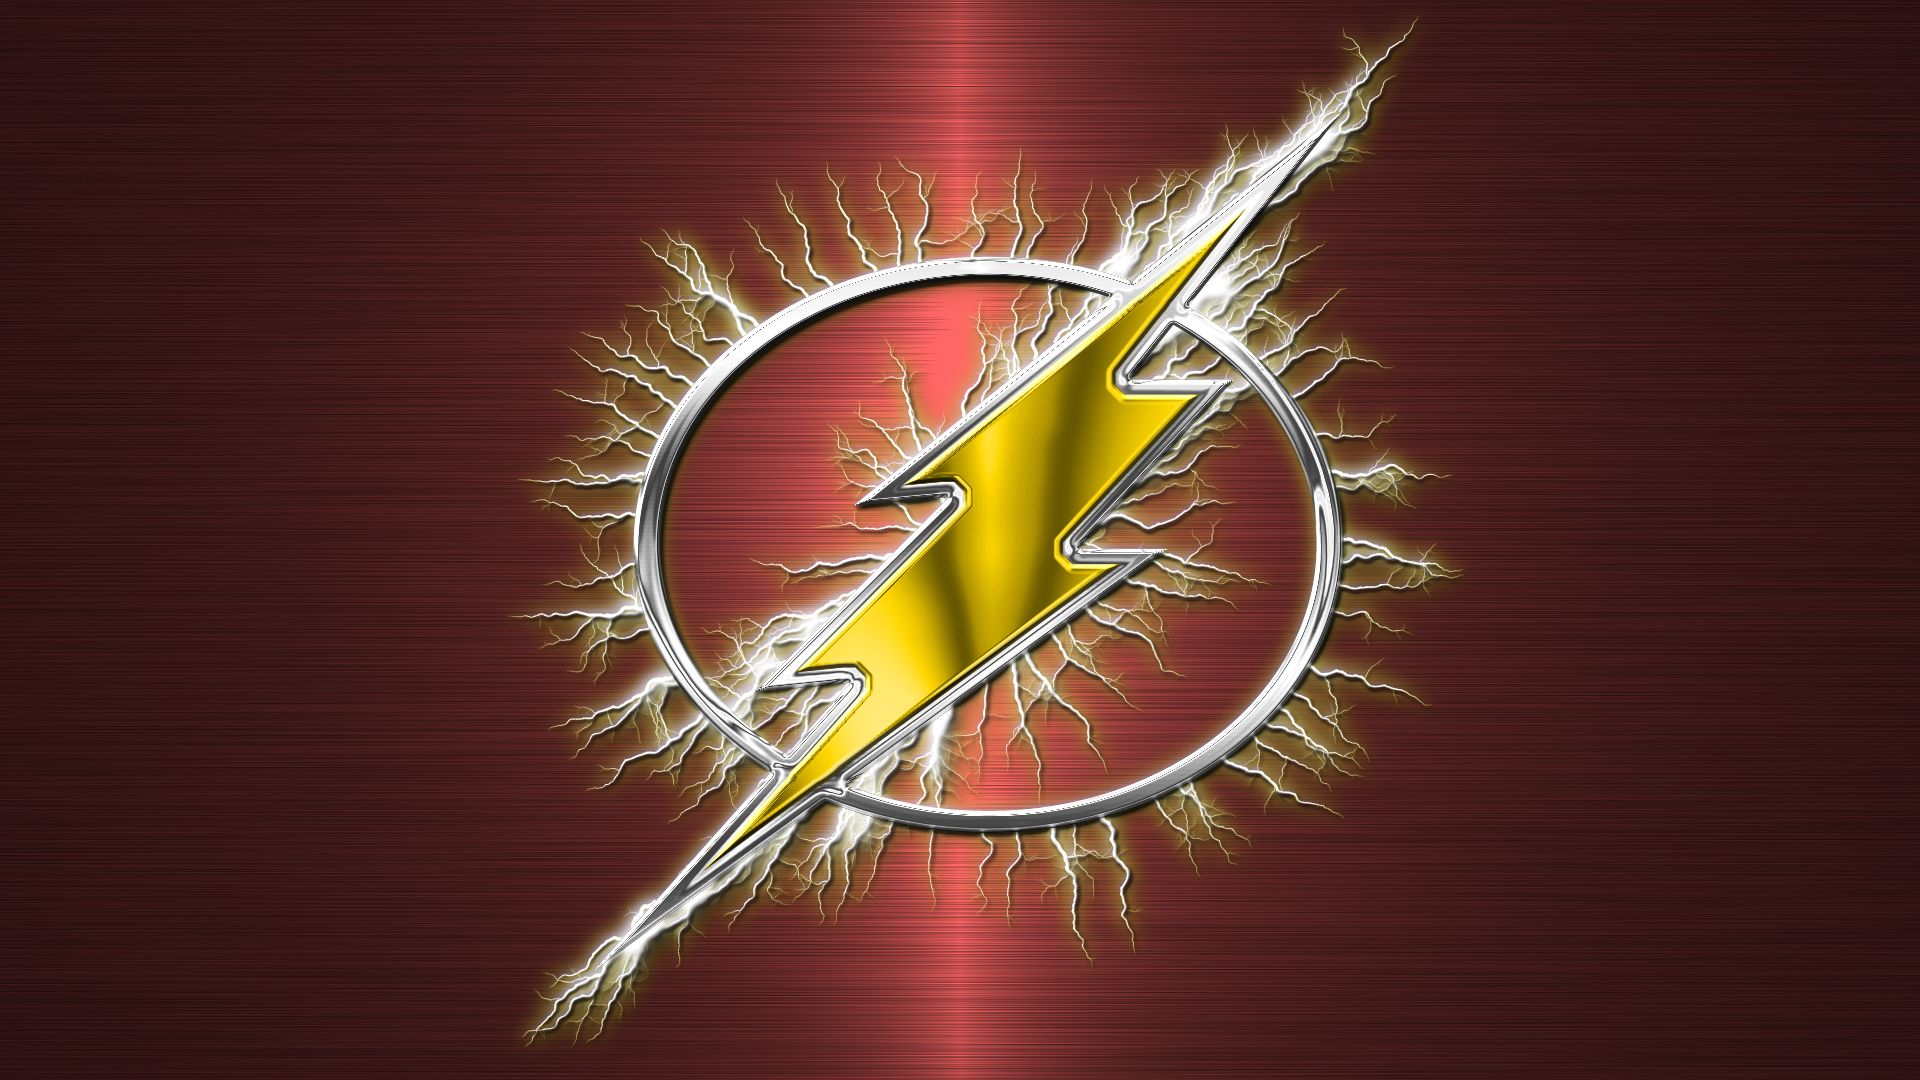 Cool Flash Wallpaper Free Cool Flash Background